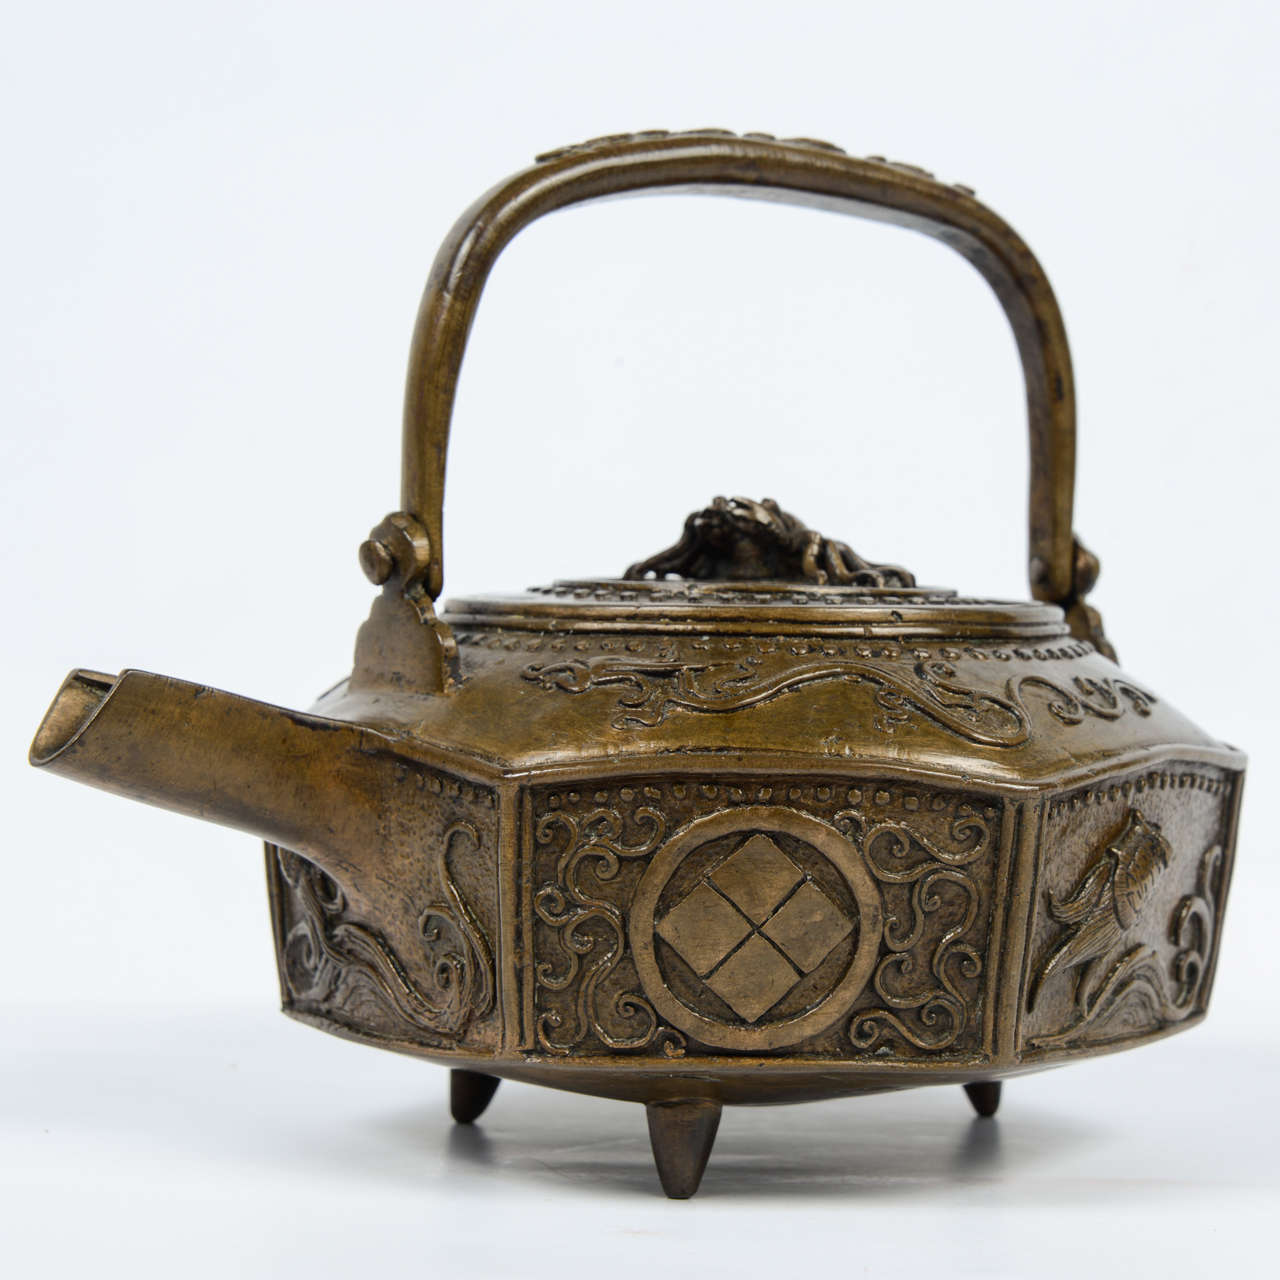 Six faces teapot in patinated bronze. Le lid decorated with a crab, the body decorated with turtles, marine animals and symbols.

Ancient restoration on one foot.